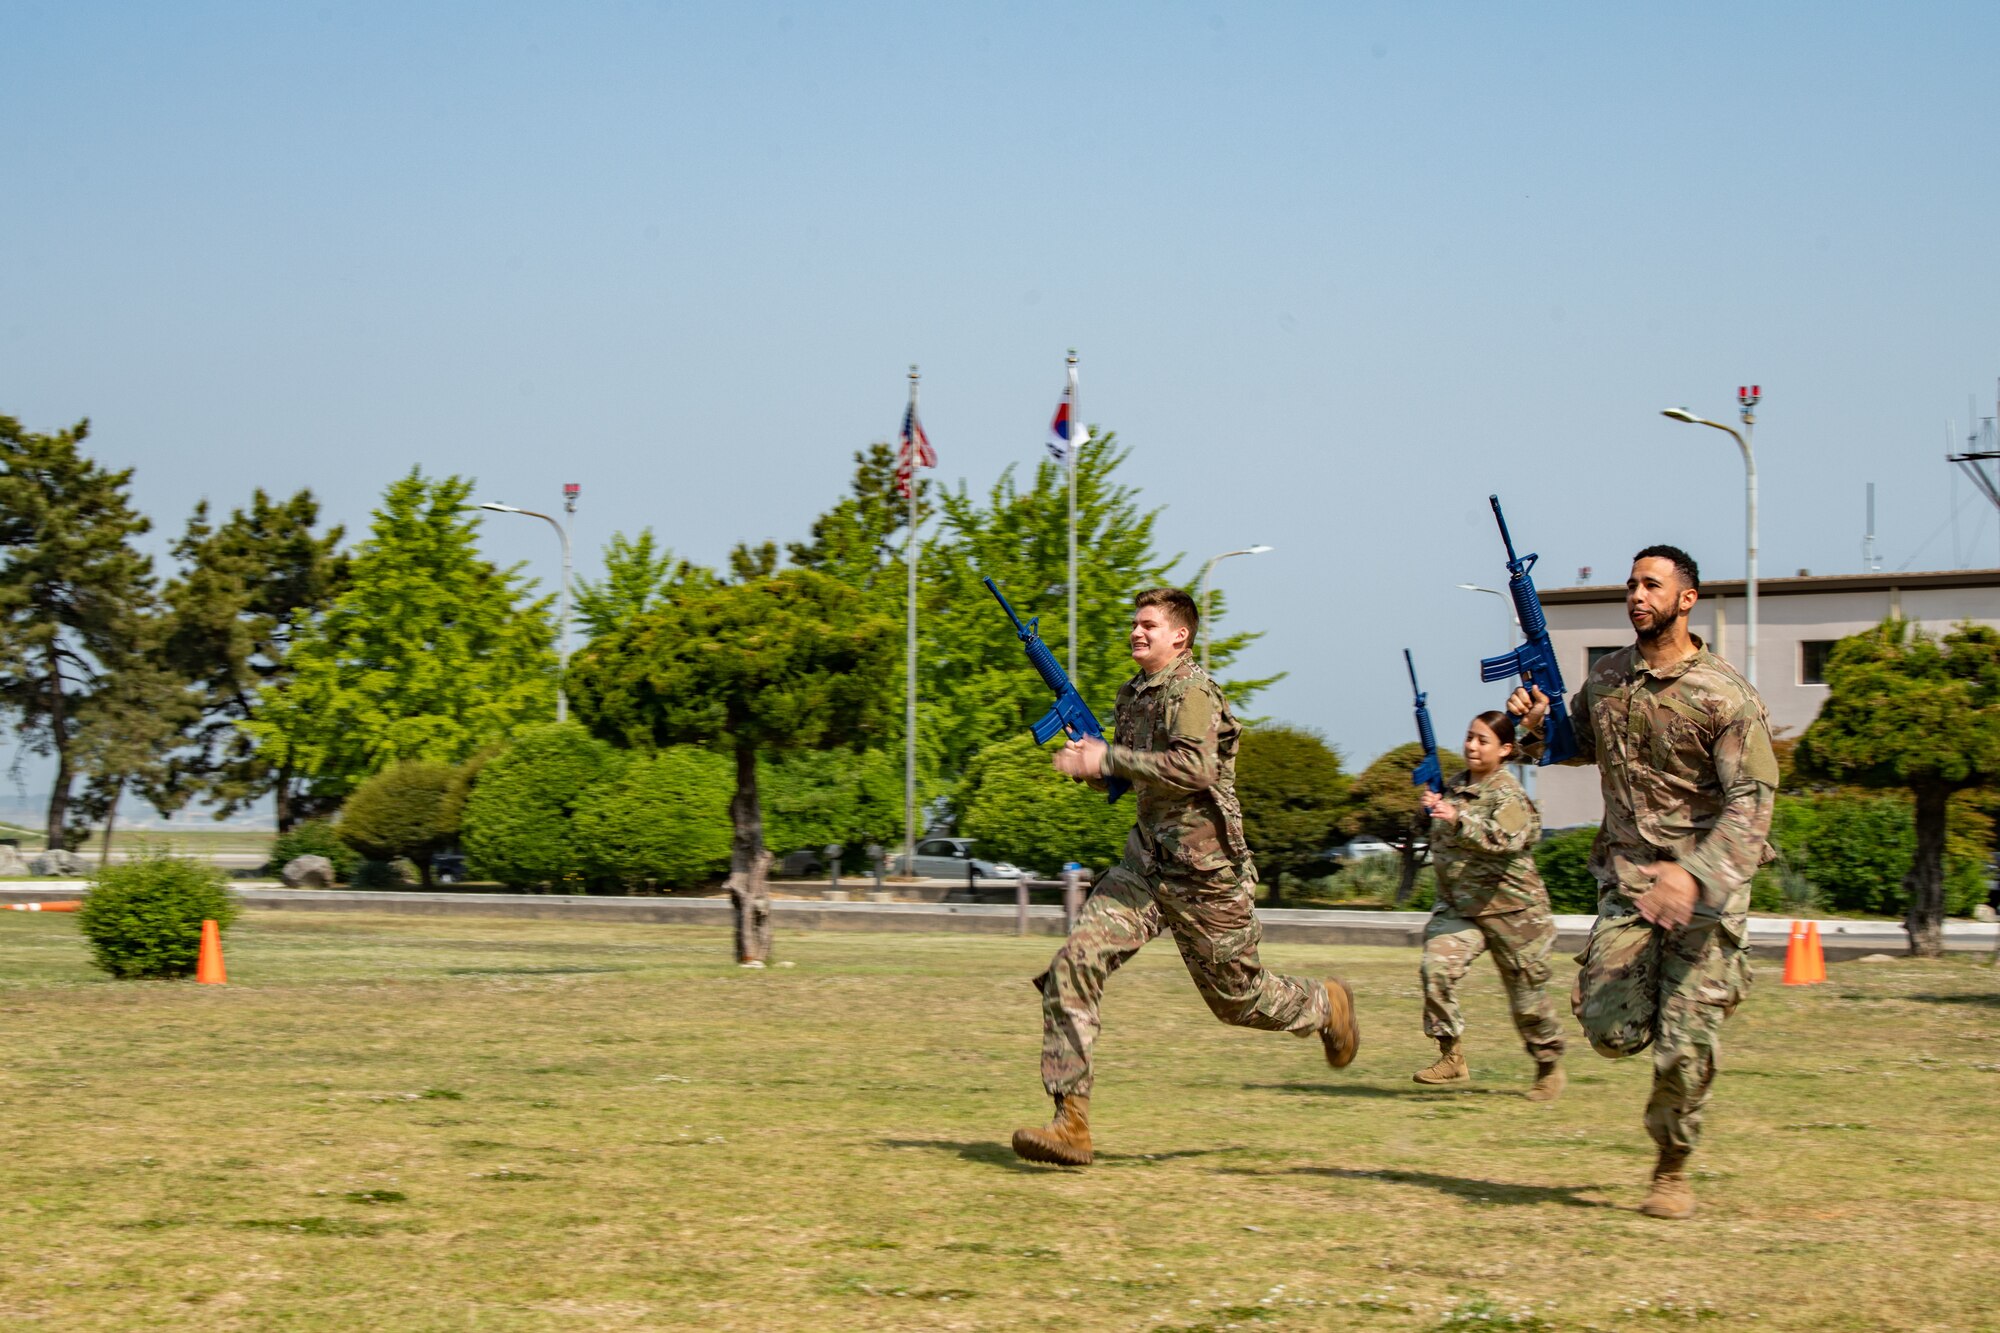 Airmen from the 8th Security Forces Squadron participate in a Defender Challenge during Police Week 2022 at Kunsan Air Base, Republic of Korea, May 17, 2022. During this week, Airmen from the 8th Fighter Wing participated in a myriad of activities to pay tribute to fallen law enforcement officers; to include a memorial run, rifle competition and relay challenge. (U.S. Air Force photo by Staff Sgt. Jesenia Landaverde)